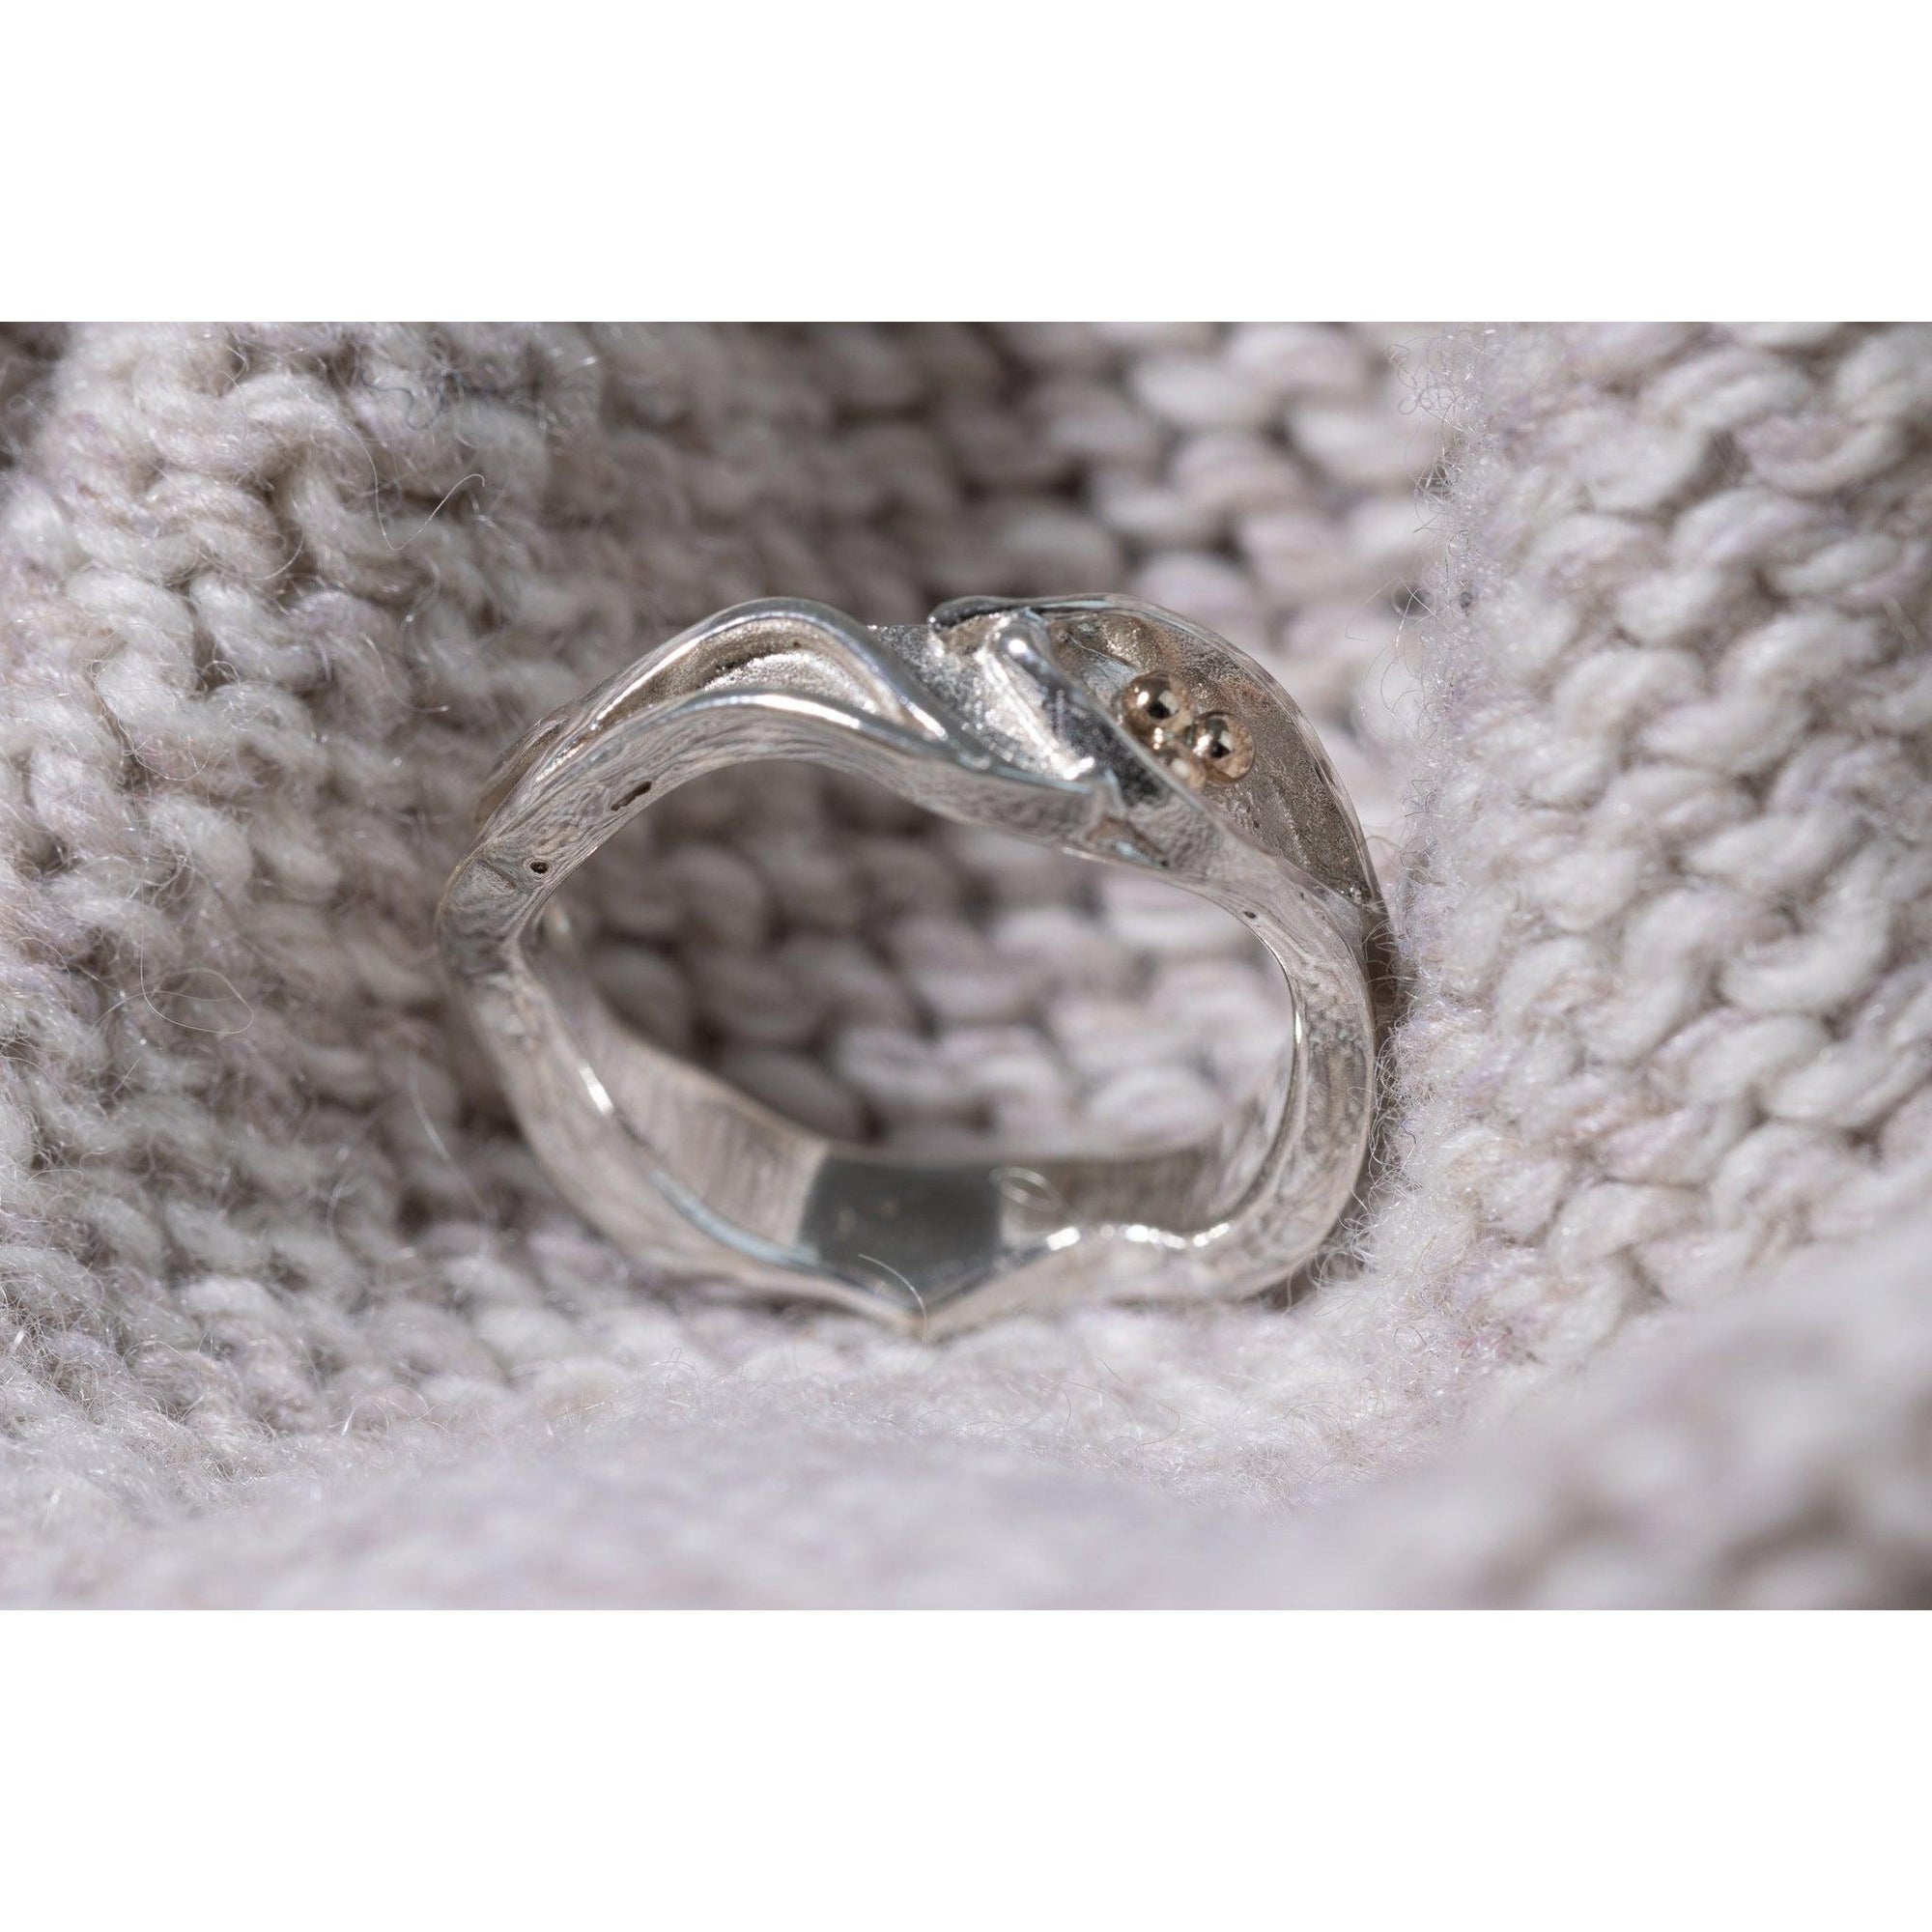 'LG57 - Silver Ring with 9ct Gold Beads' by Les Grimshaw, available at Padstow Gallery, Cornwall